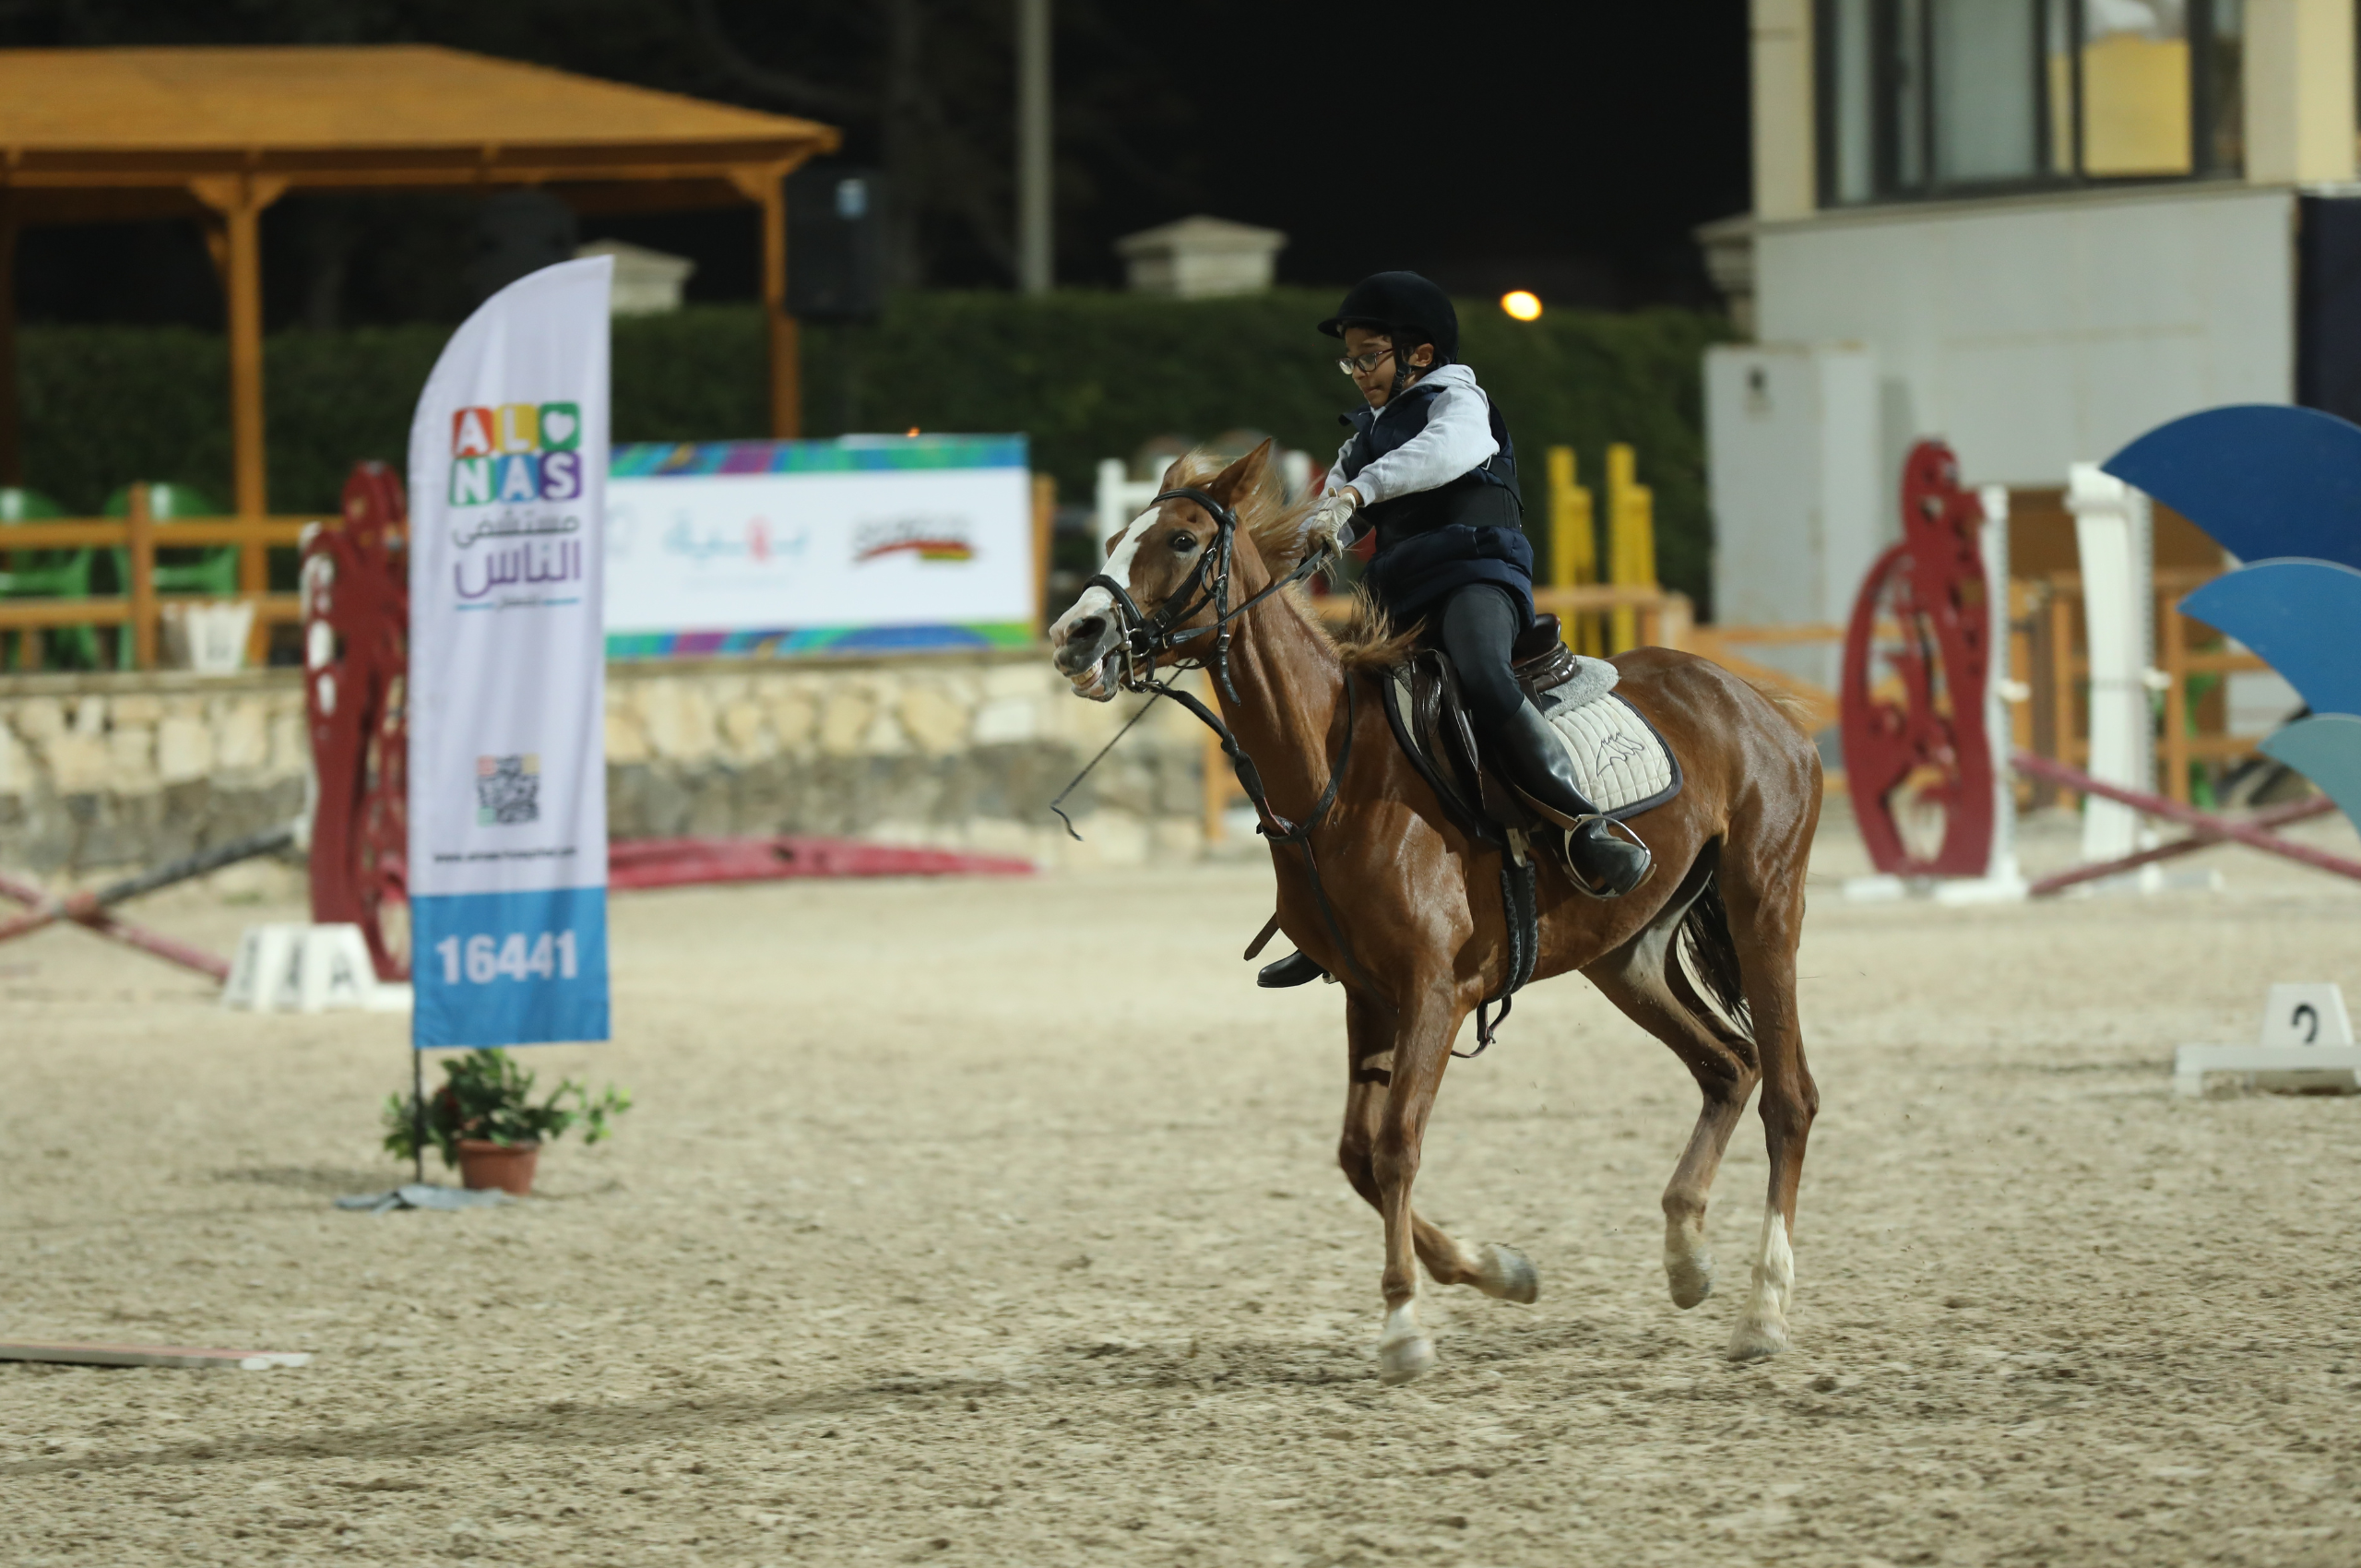 The Horse Riding Competition by Pegasus Equestrian Center - Dreamland